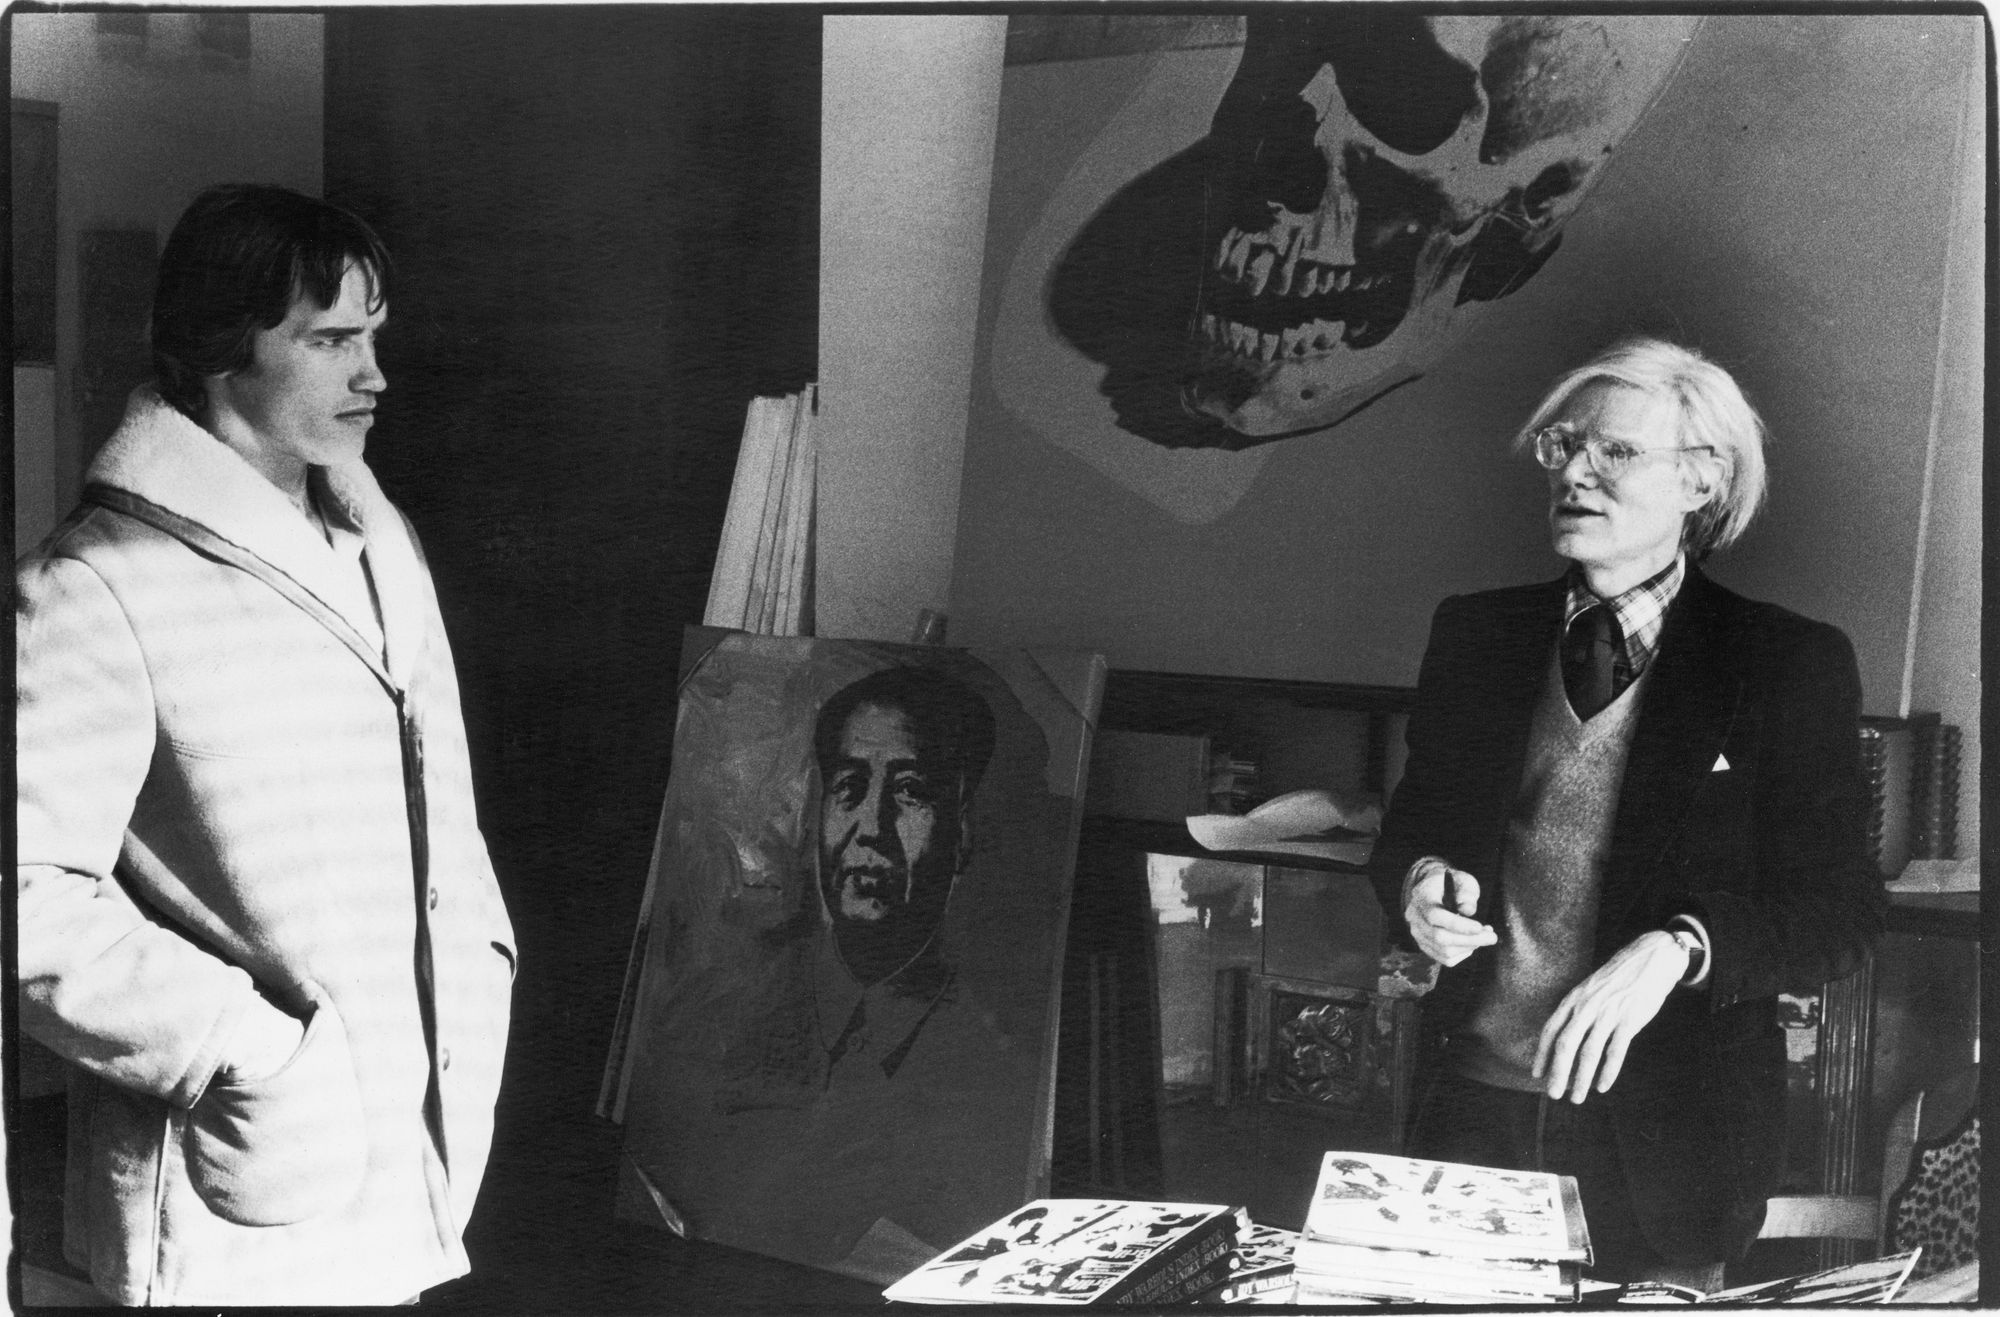 A young Arnold Schwarzenegger stands in an art studio, looking intently at Andy Warhol.